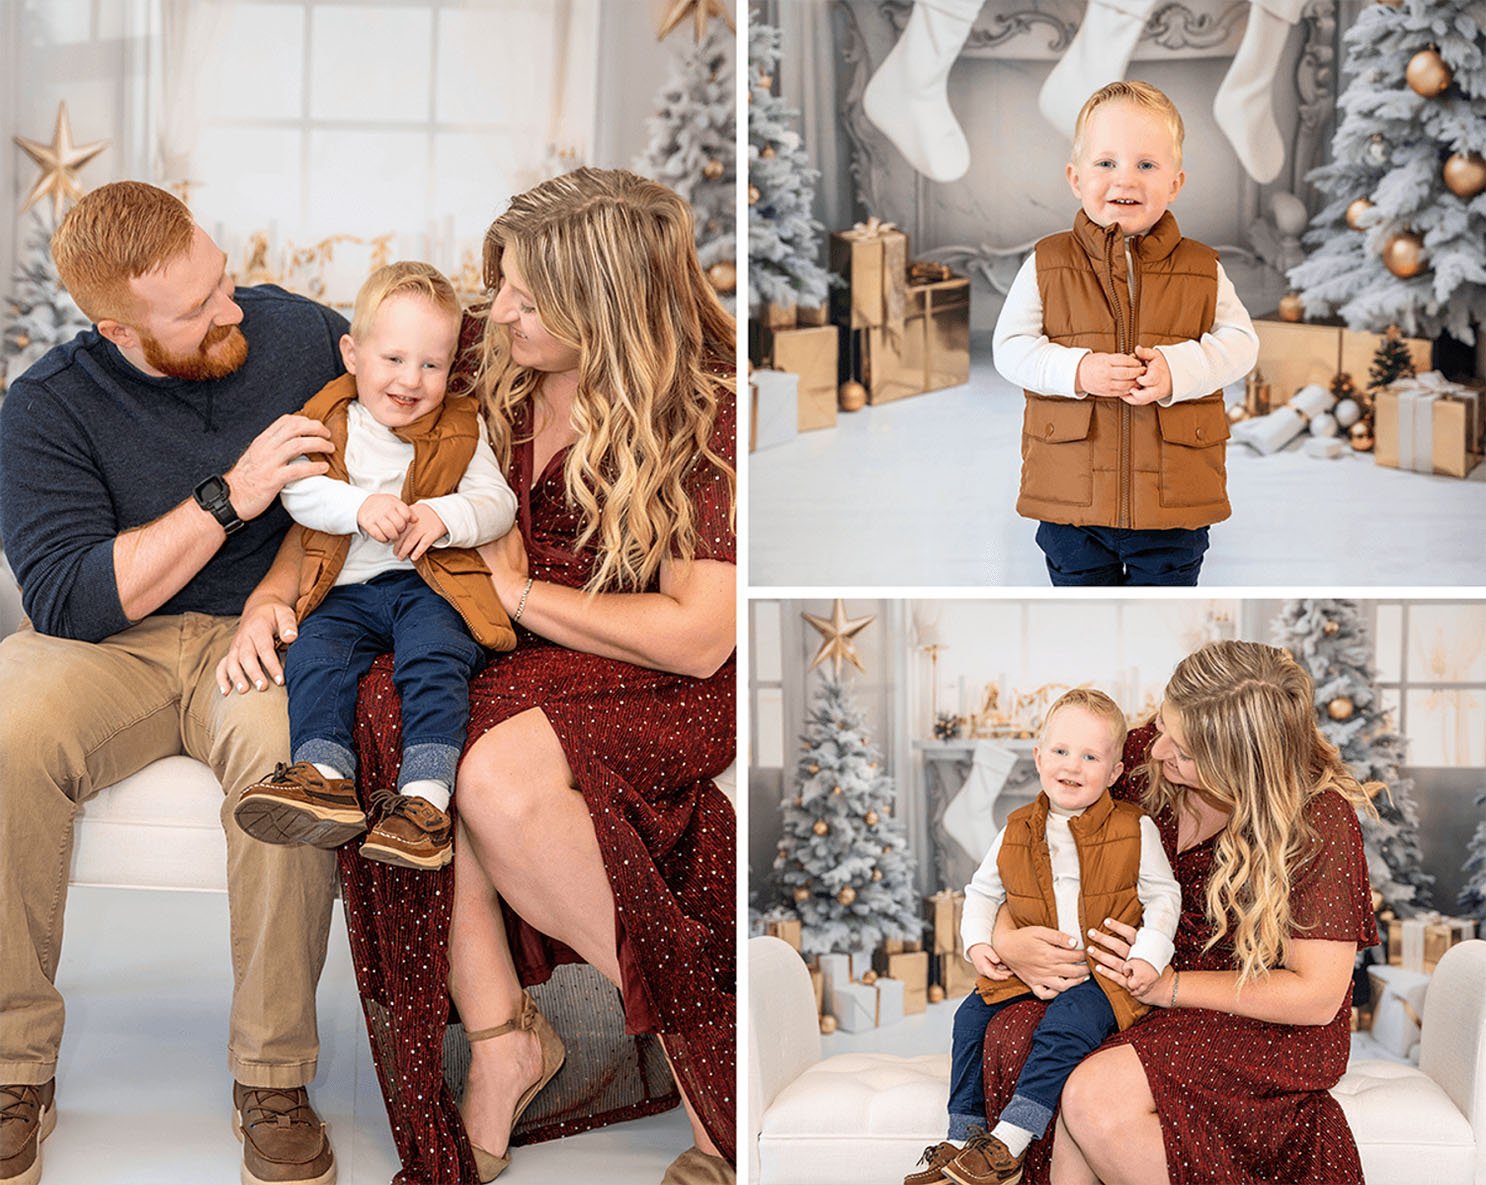 Holiday themed family portraits for winter, Christmas, New Years, and more